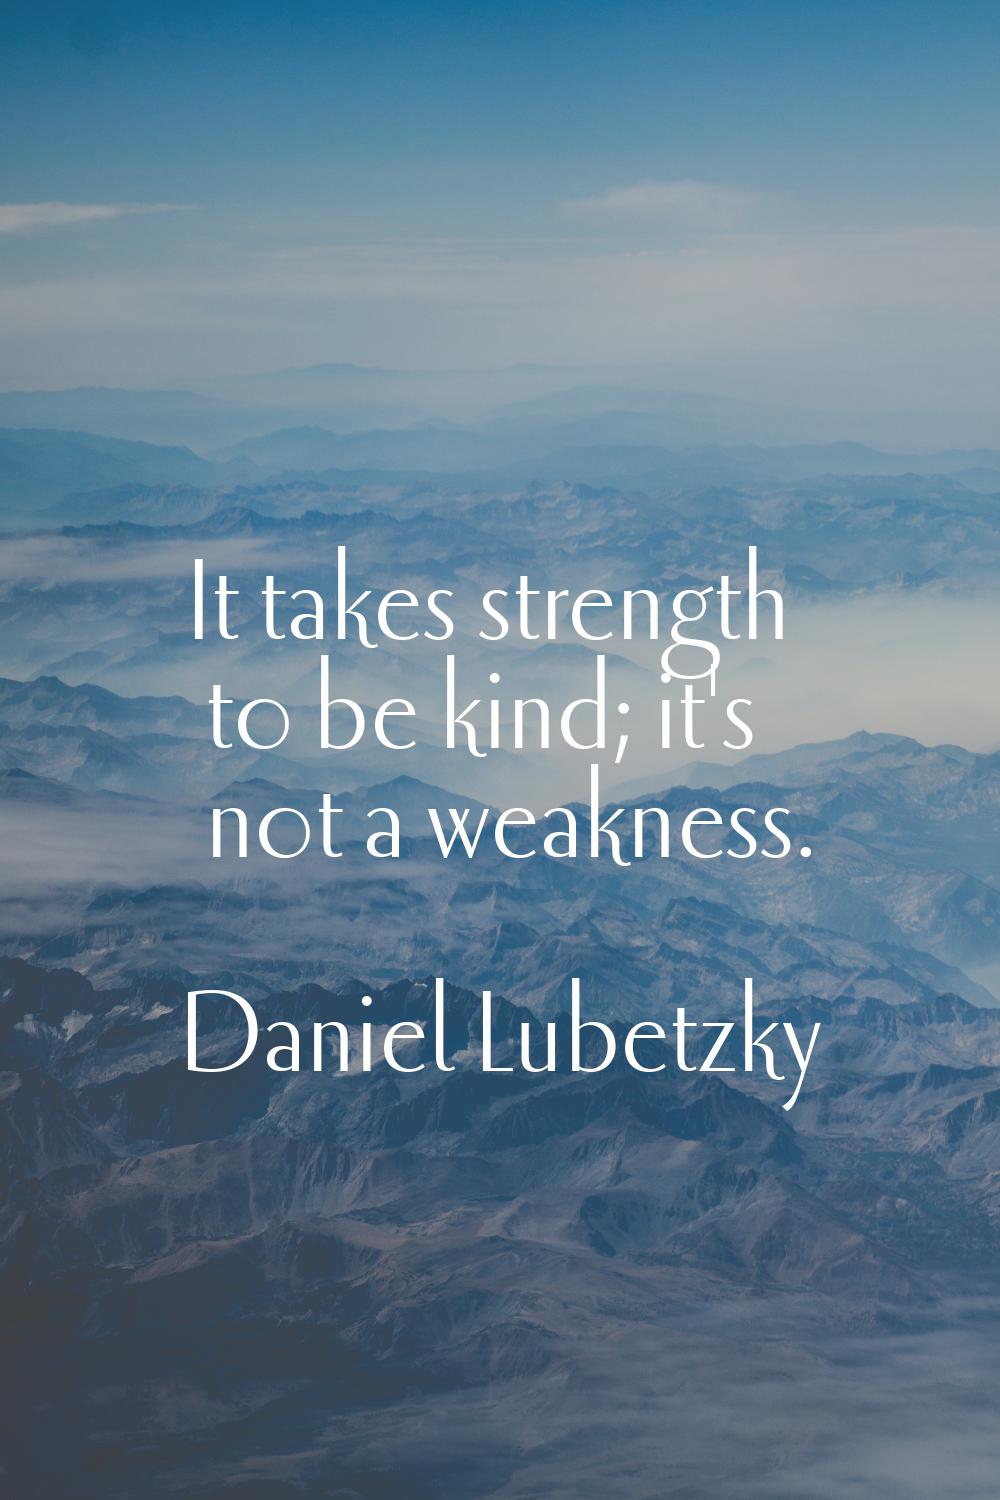 It takes strength to be kind; it's not a weakness.